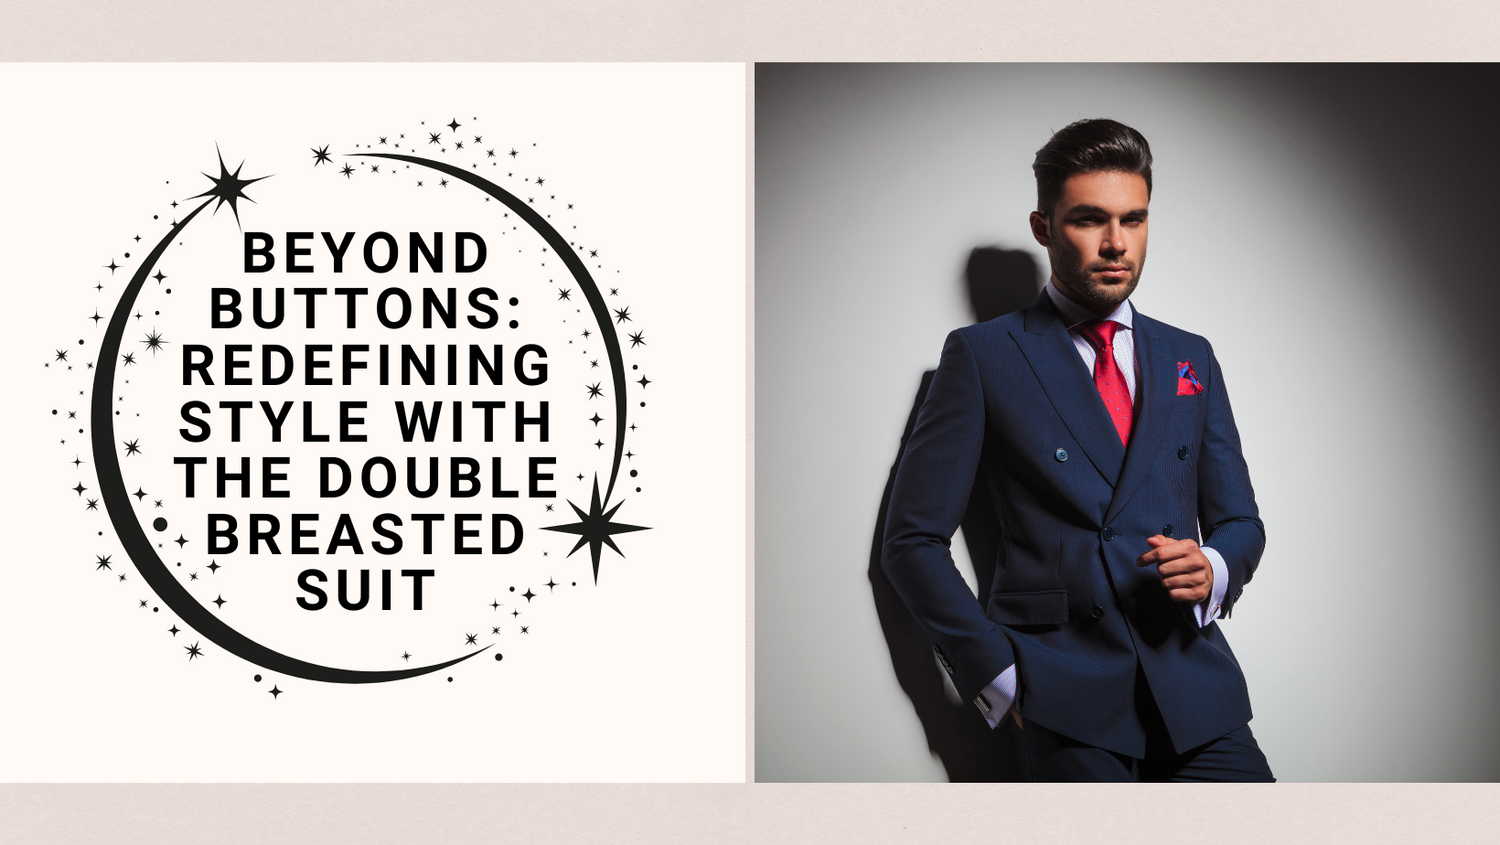 Beyond Buttons: Redefining Style with the Double Breasted Suit